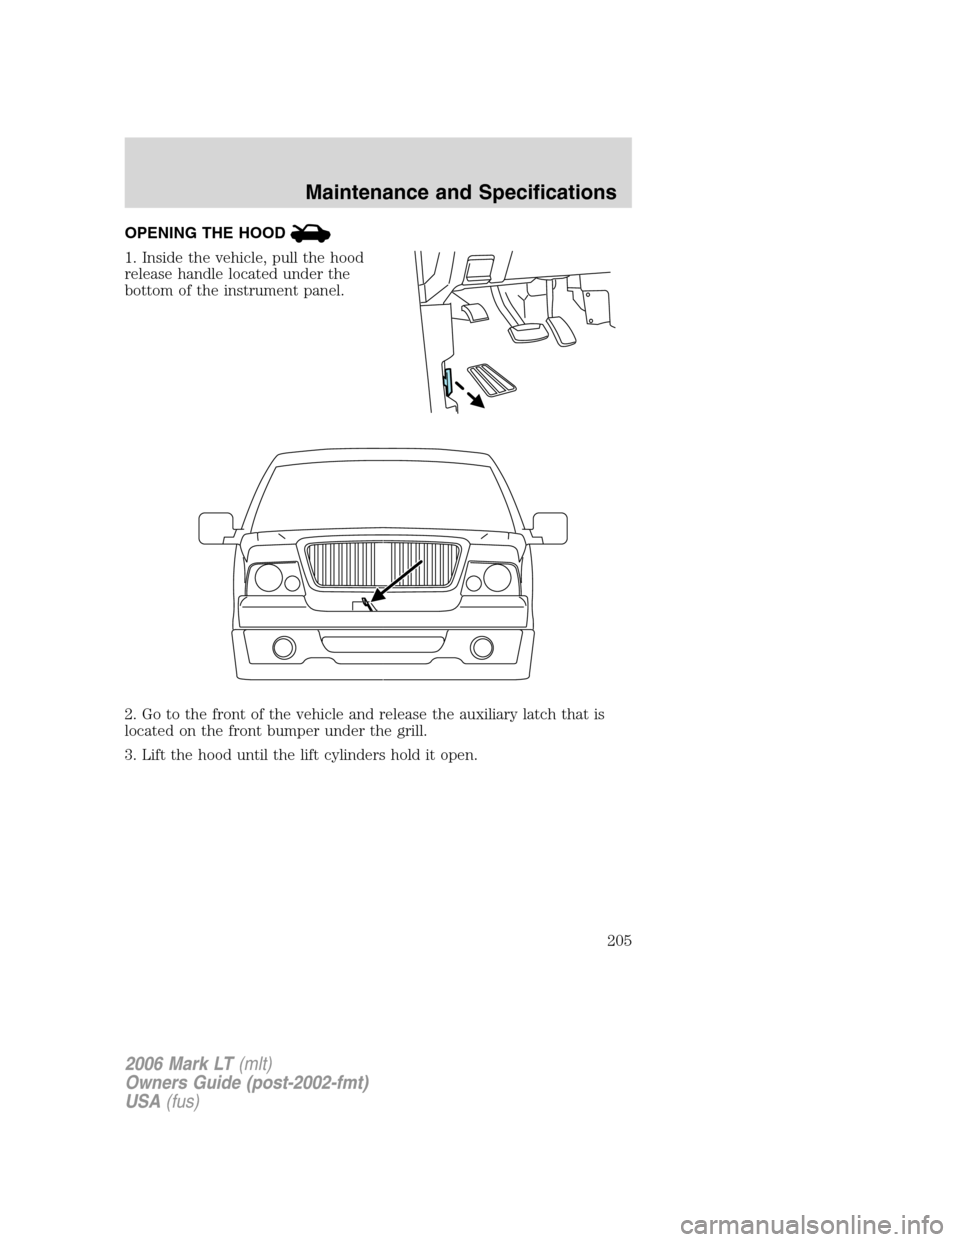 LINCOLN MARK LT 2006  Owners Manual OPENING THE HOOD
1. Inside the vehicle, pull the hood
release handle located under the
bottom of the instrument panel.
2. Go to the front of the vehicle and release the auxiliary latch that is
located